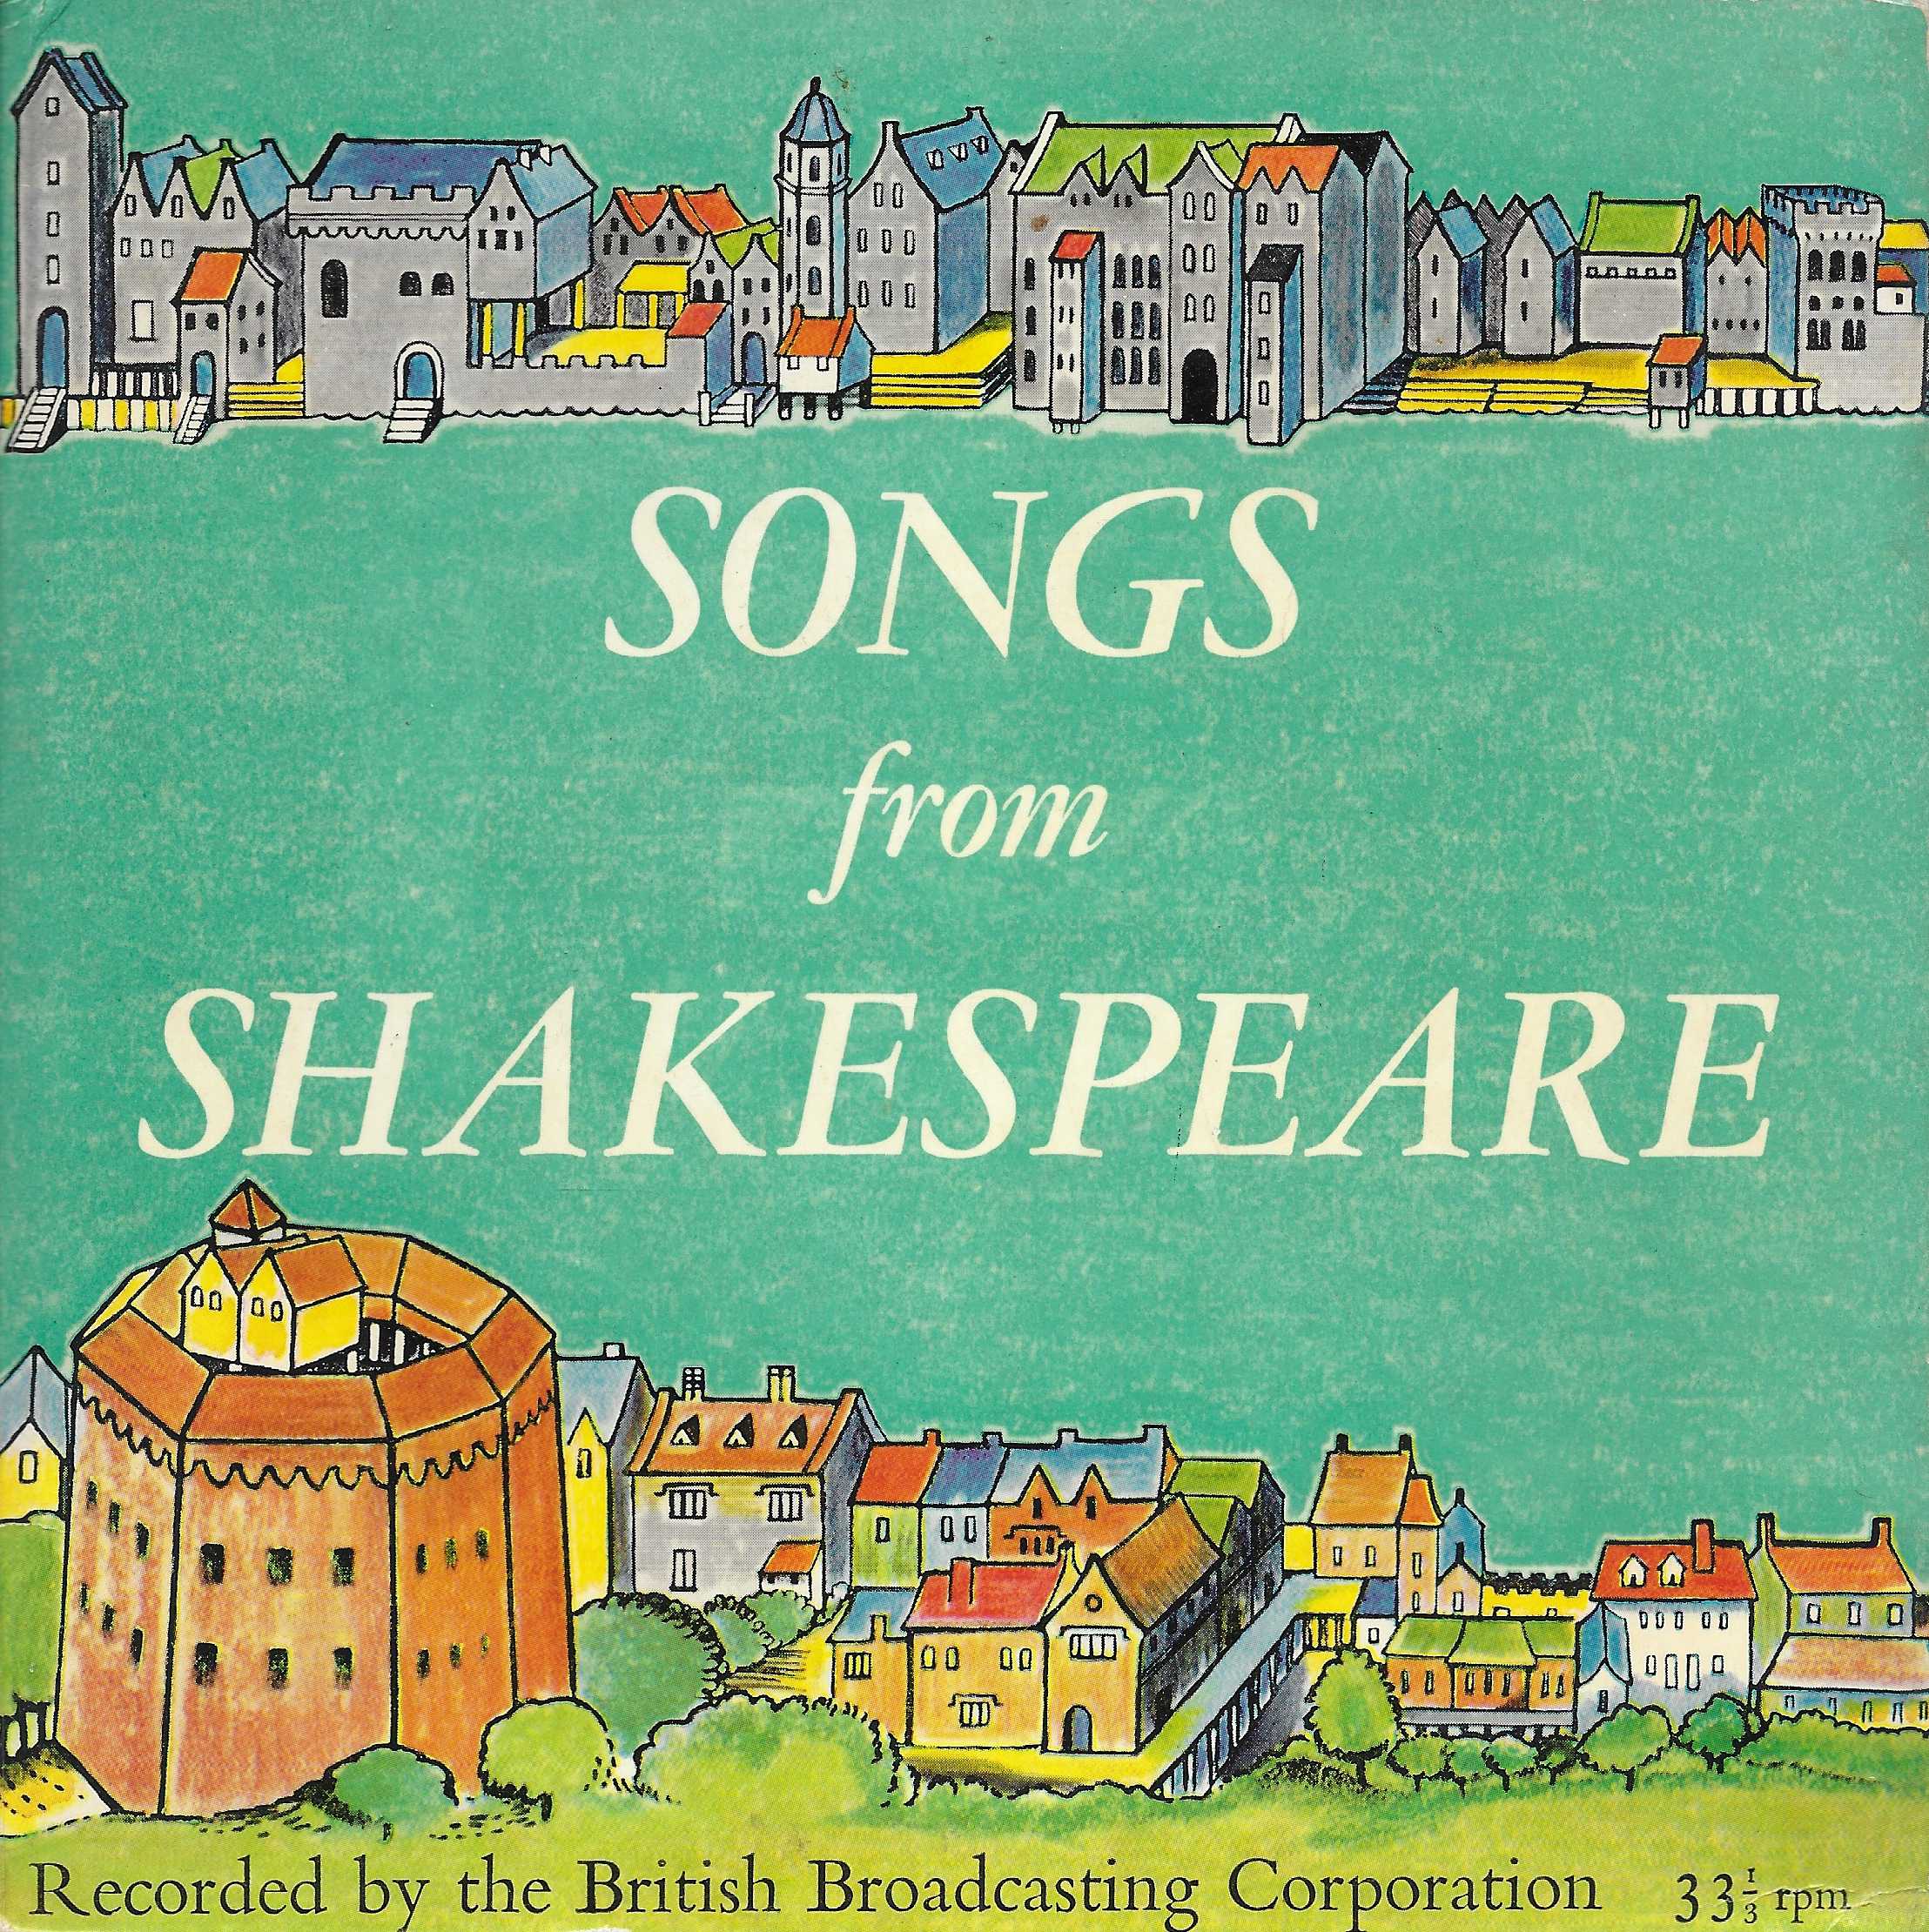 Picture of ETS 5 Songs from Shakespeare by artist Elizabeth Robinson / Philip Todd / Arr. Norman Fraser from the BBC singles - Records and Tapes library